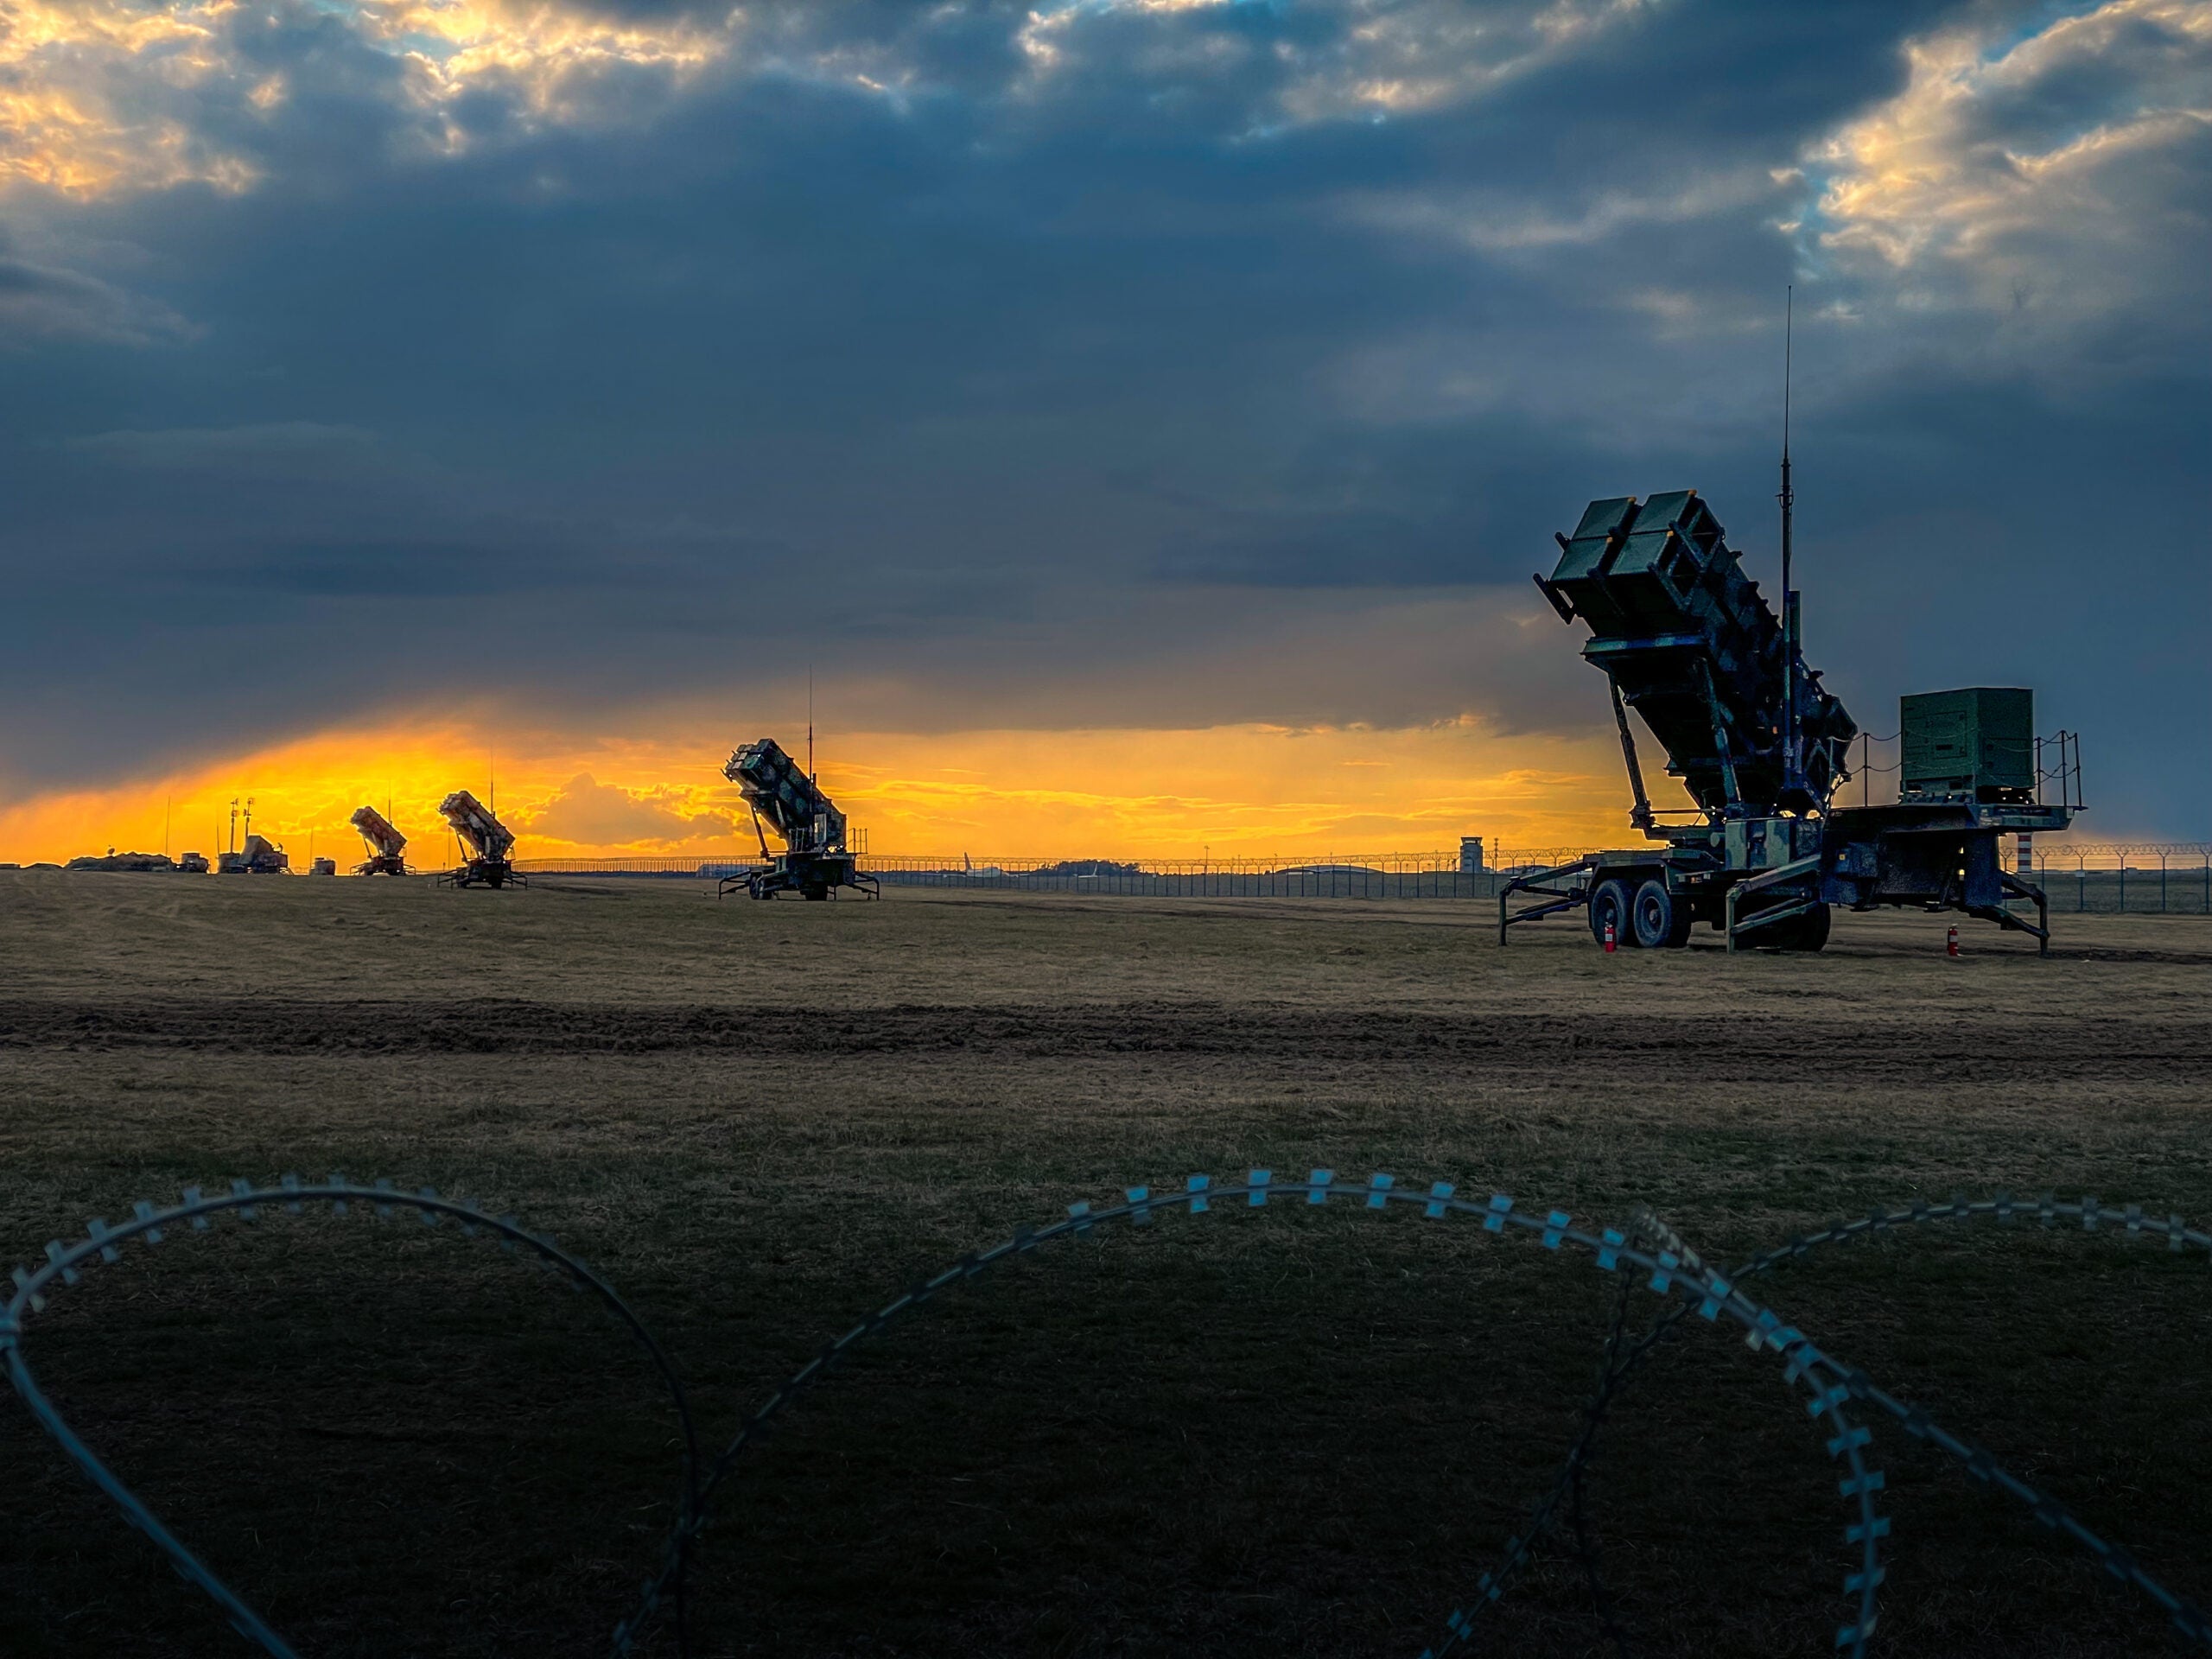 U.S. Patriot missile batteries from the 5th Battalion, 7th Air Defense Artillery Regiment stand ready at sunset in Poland on April 10, 2022. The deployment of these air &amp; missile defense systems is purely defensive. They contribute to the robust shielding provided along NATO’s Eastern flank. The SBAMD systems will protect Allied, populations, territory, and our deployed forces from attack. 

(U.S. Army photo by Sgt. 1st Class Christopher Smith)